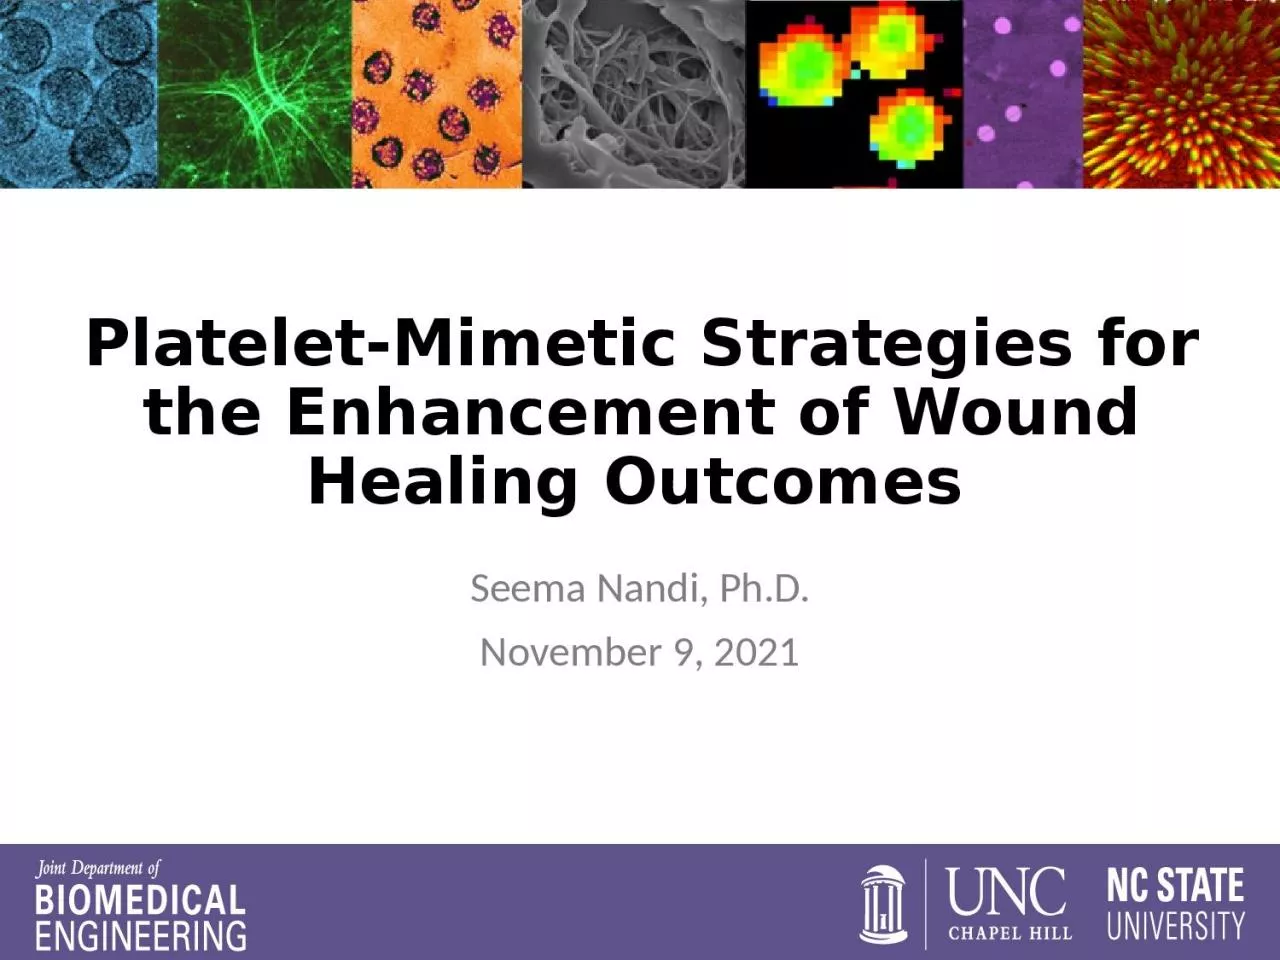 Platelet-Mimetic Strategies for the Enhancement of Wound Healing Outcomes